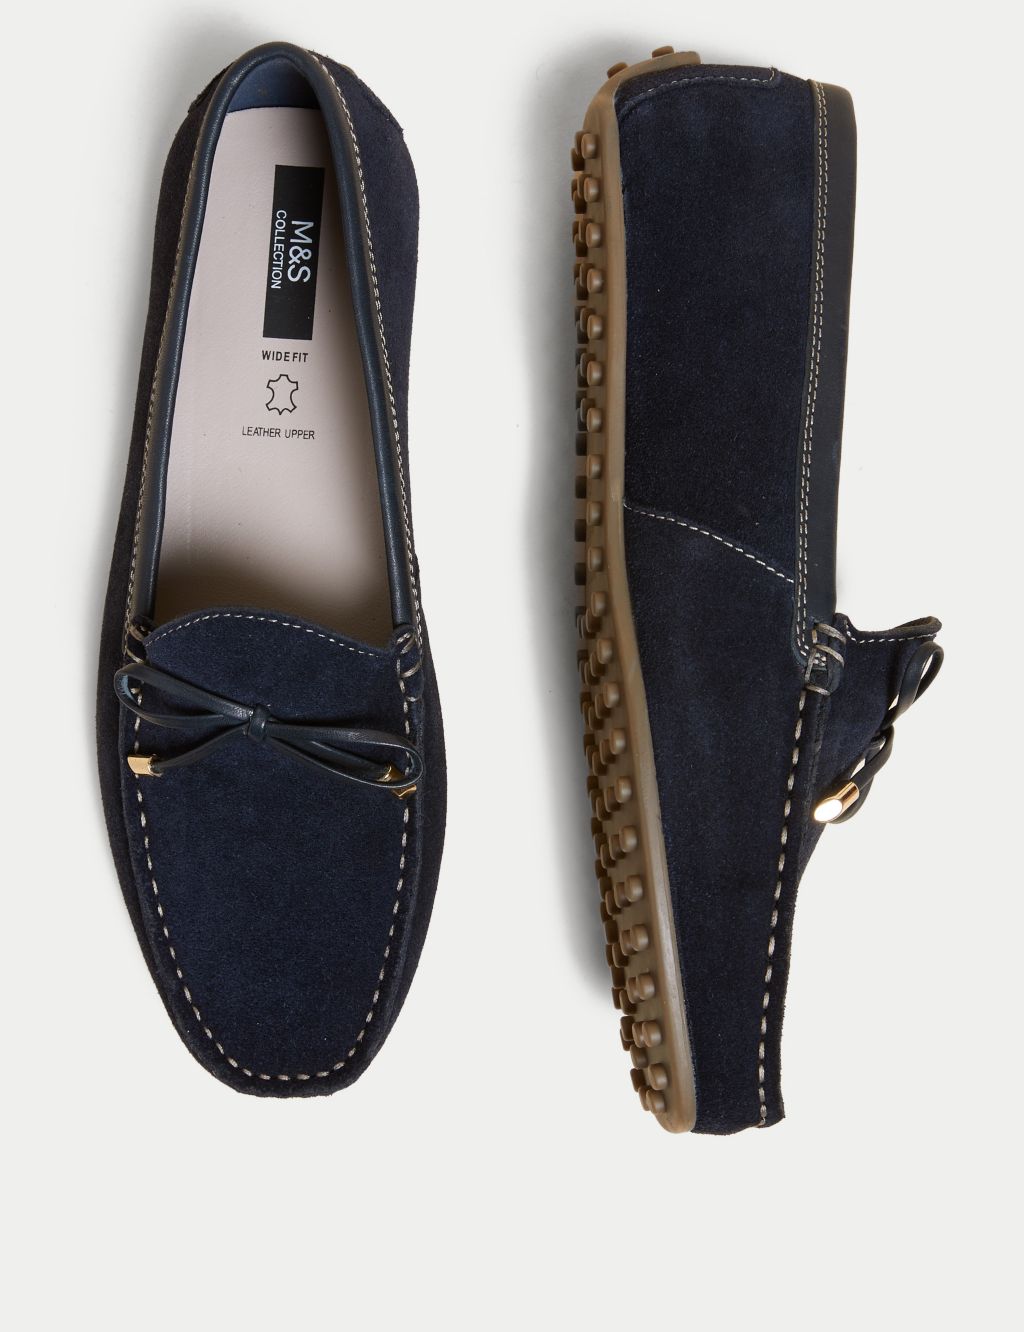 Wide Fit Suede Bow Boat Shoes image 3